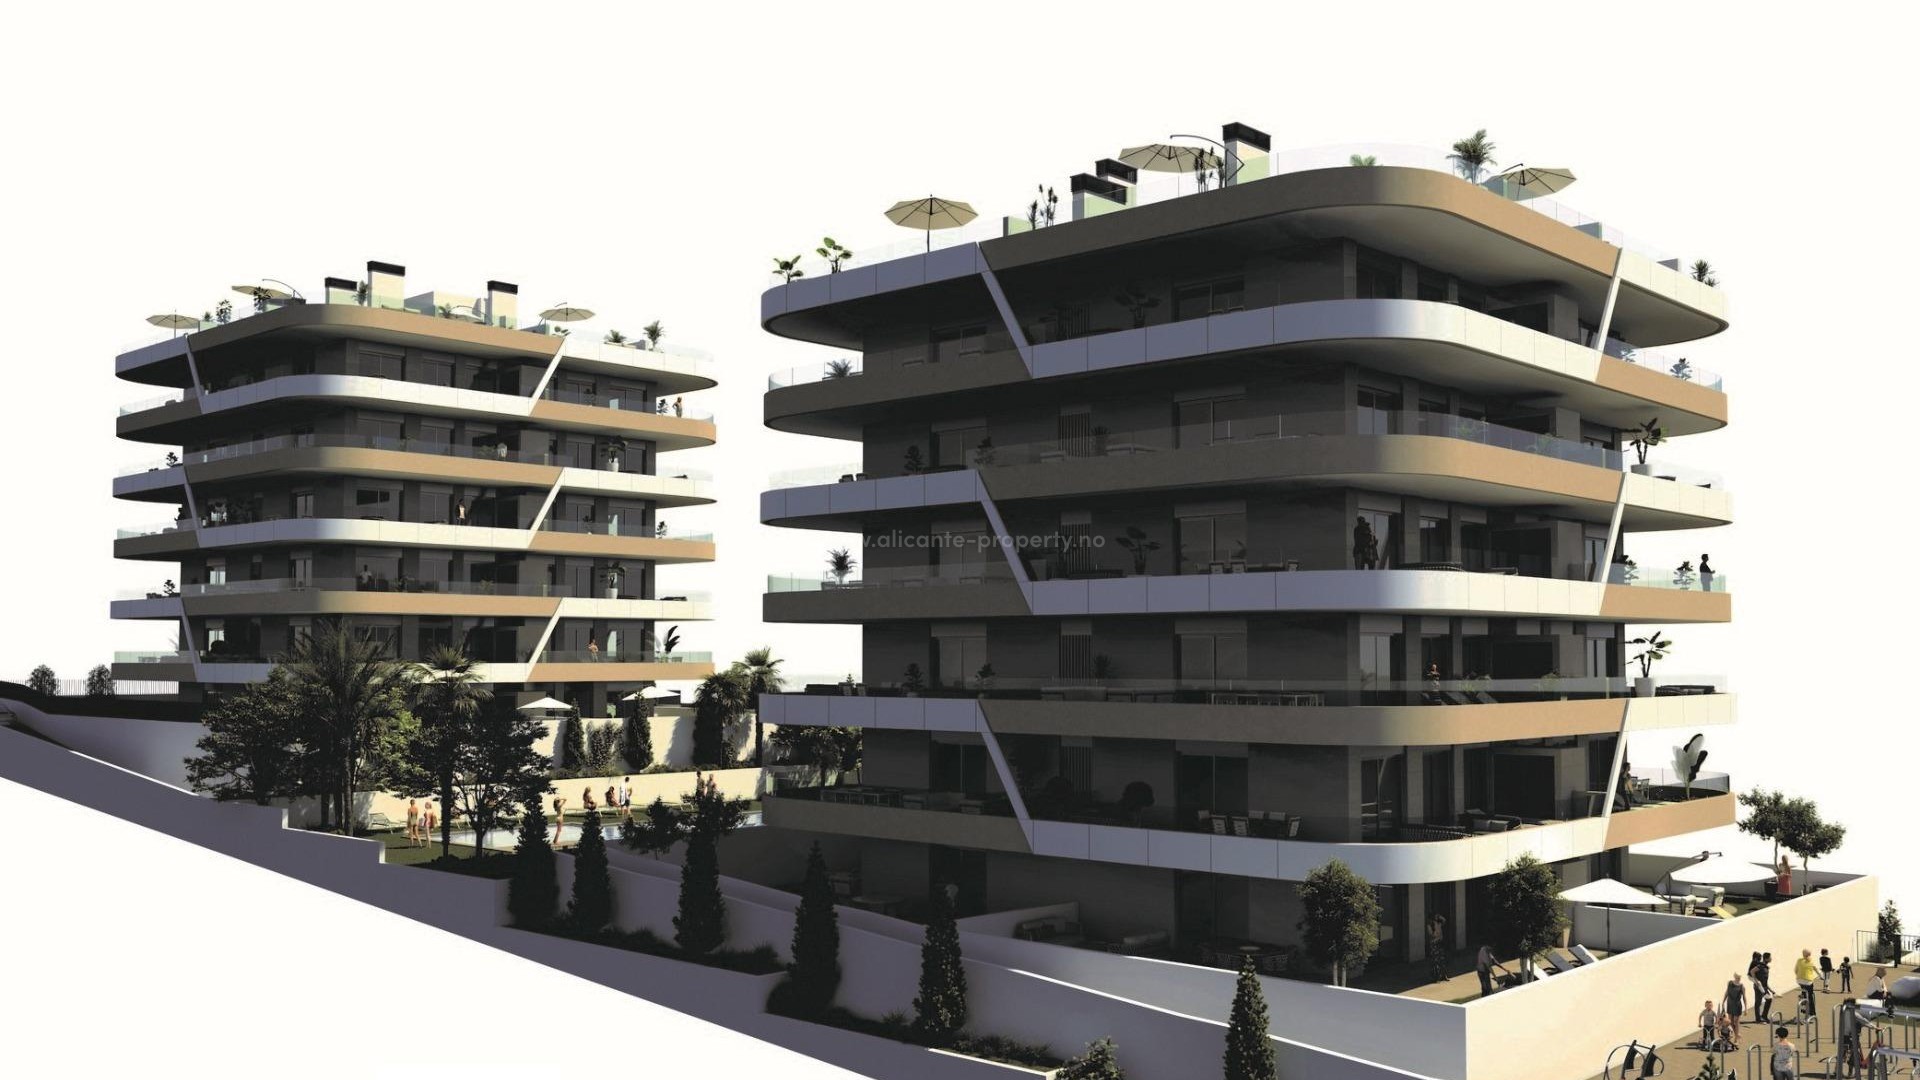 Newly built residential complex with apartments in Arenales del Sol near the beach, 2 bedrooms, 2 bathrooms. Close to Arenales beach, one of the Costa Blanca's best beaches